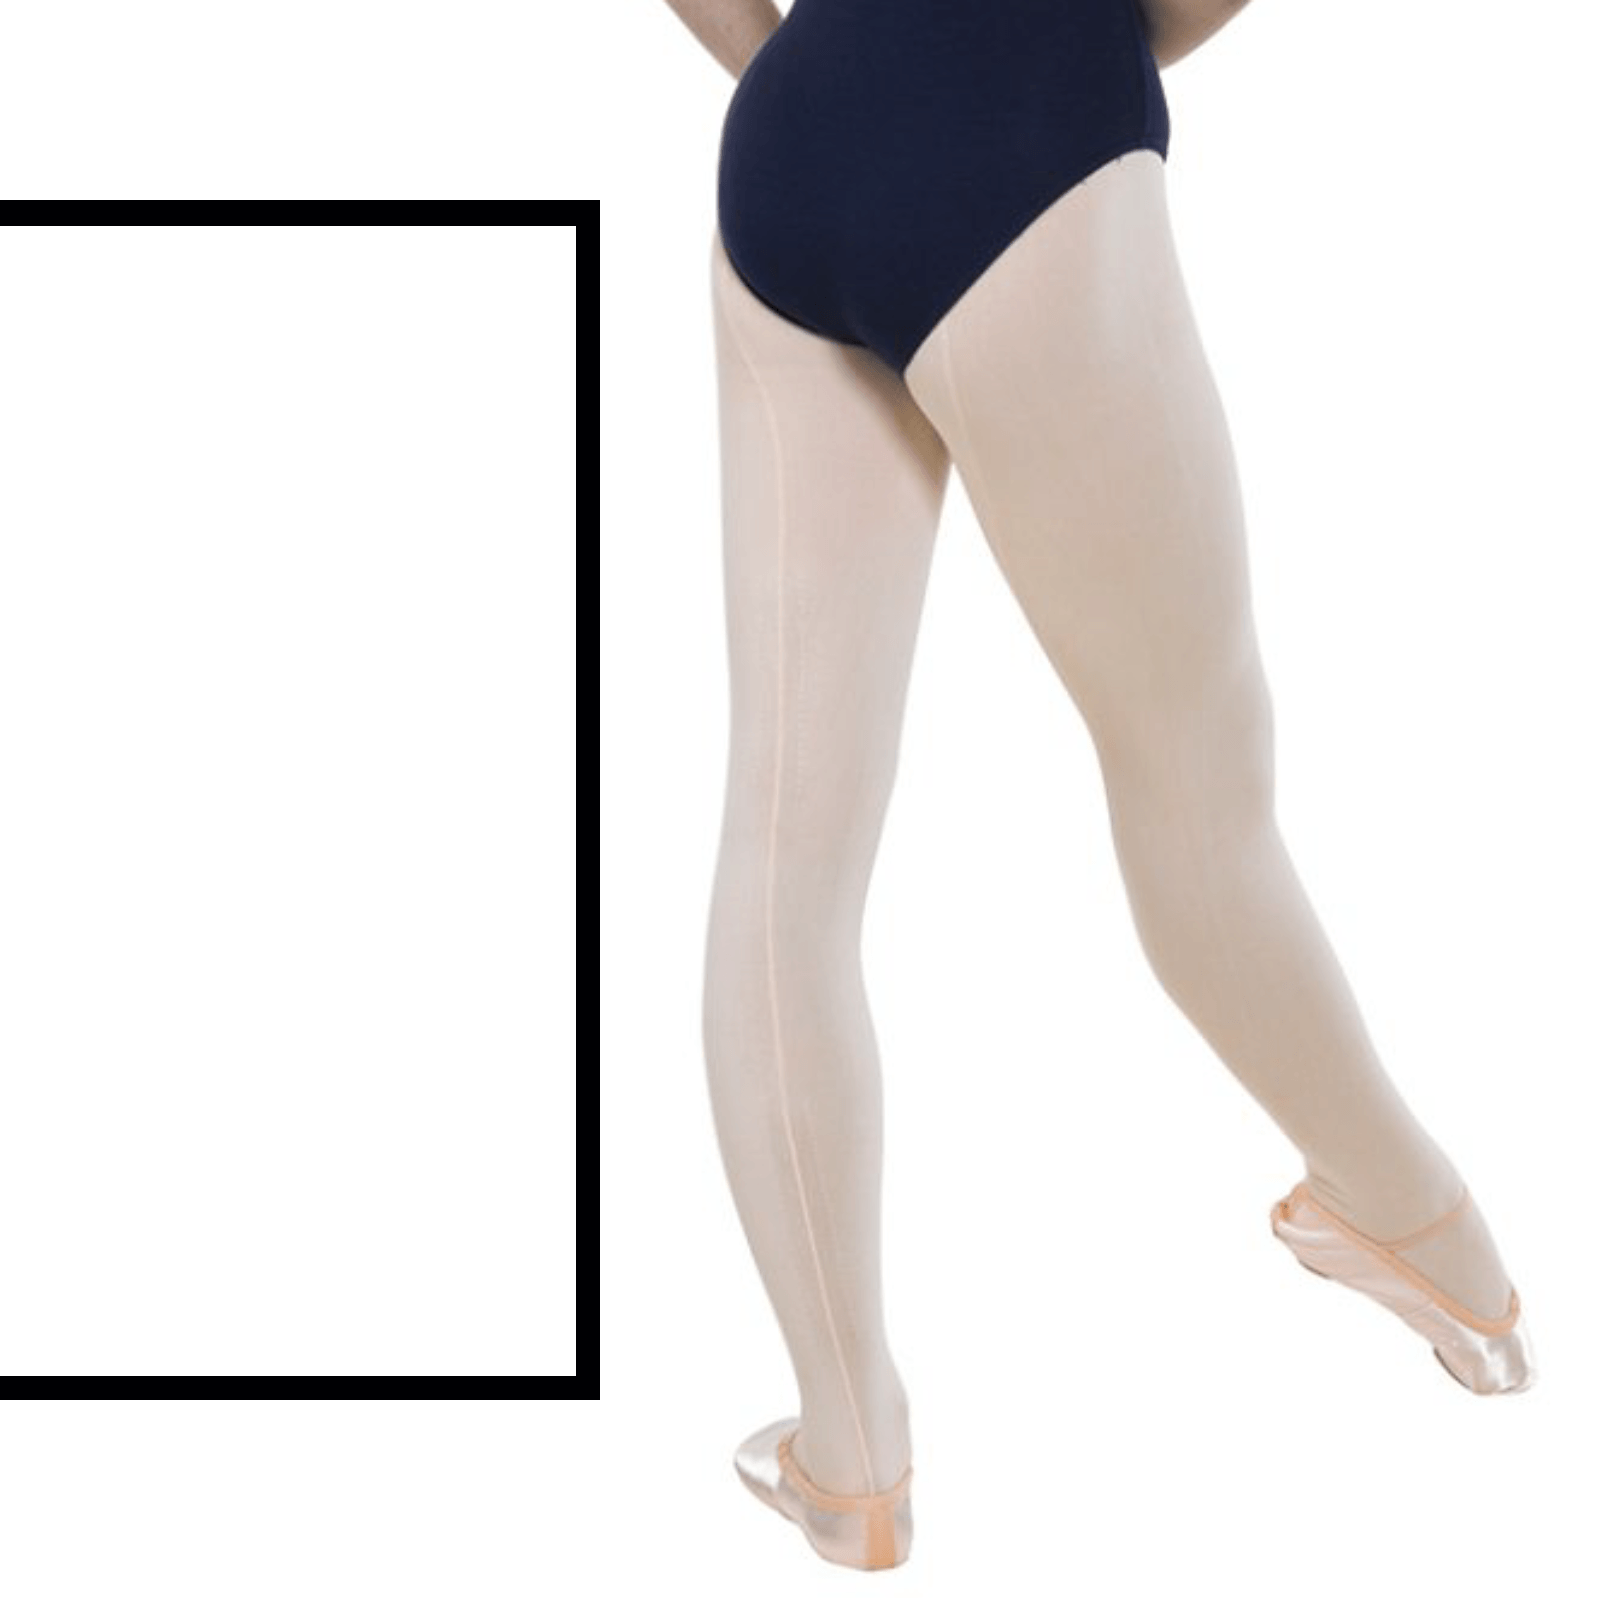 DEBUT SEAMED BALLET TIGHTS Tights & Socks Debut White Tots 2-4 years 